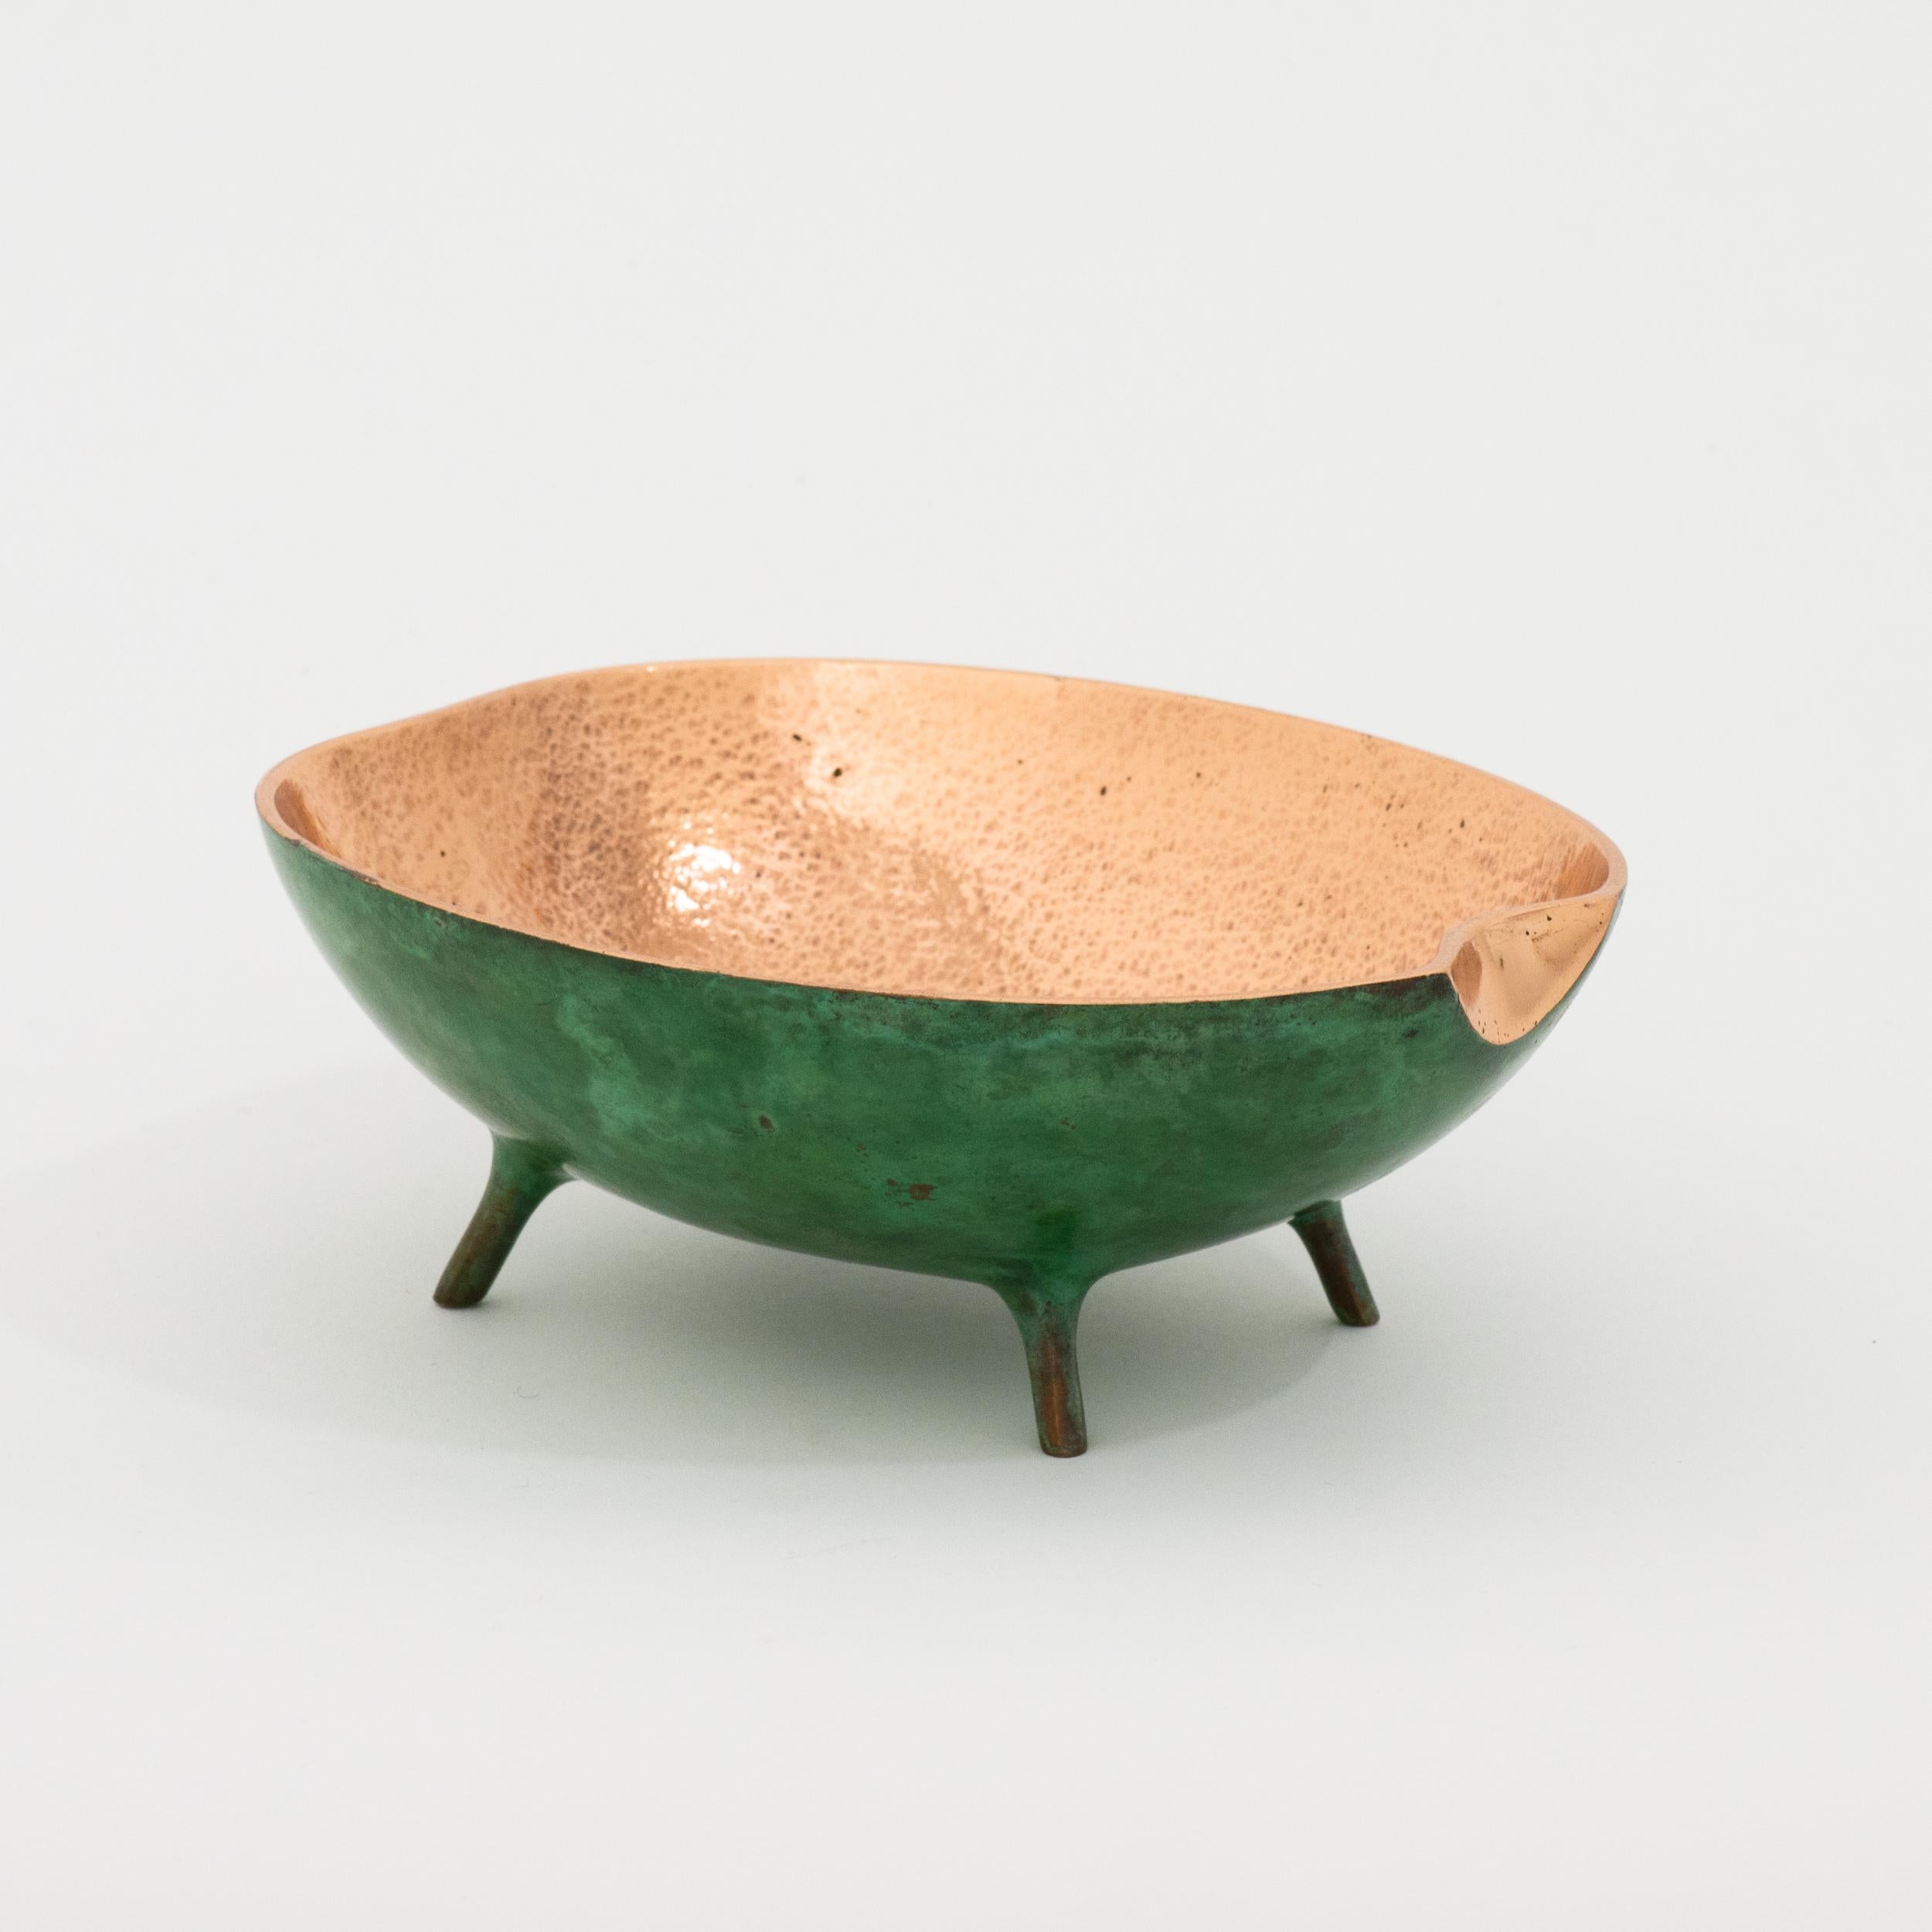 Charming and unusual handmade polished cast bronze bowl.

Each of these original and elegant bowl is handmade individually. Cast using very traditional techniques, the inside is polished and the outside is aged to show a beautiful copper green